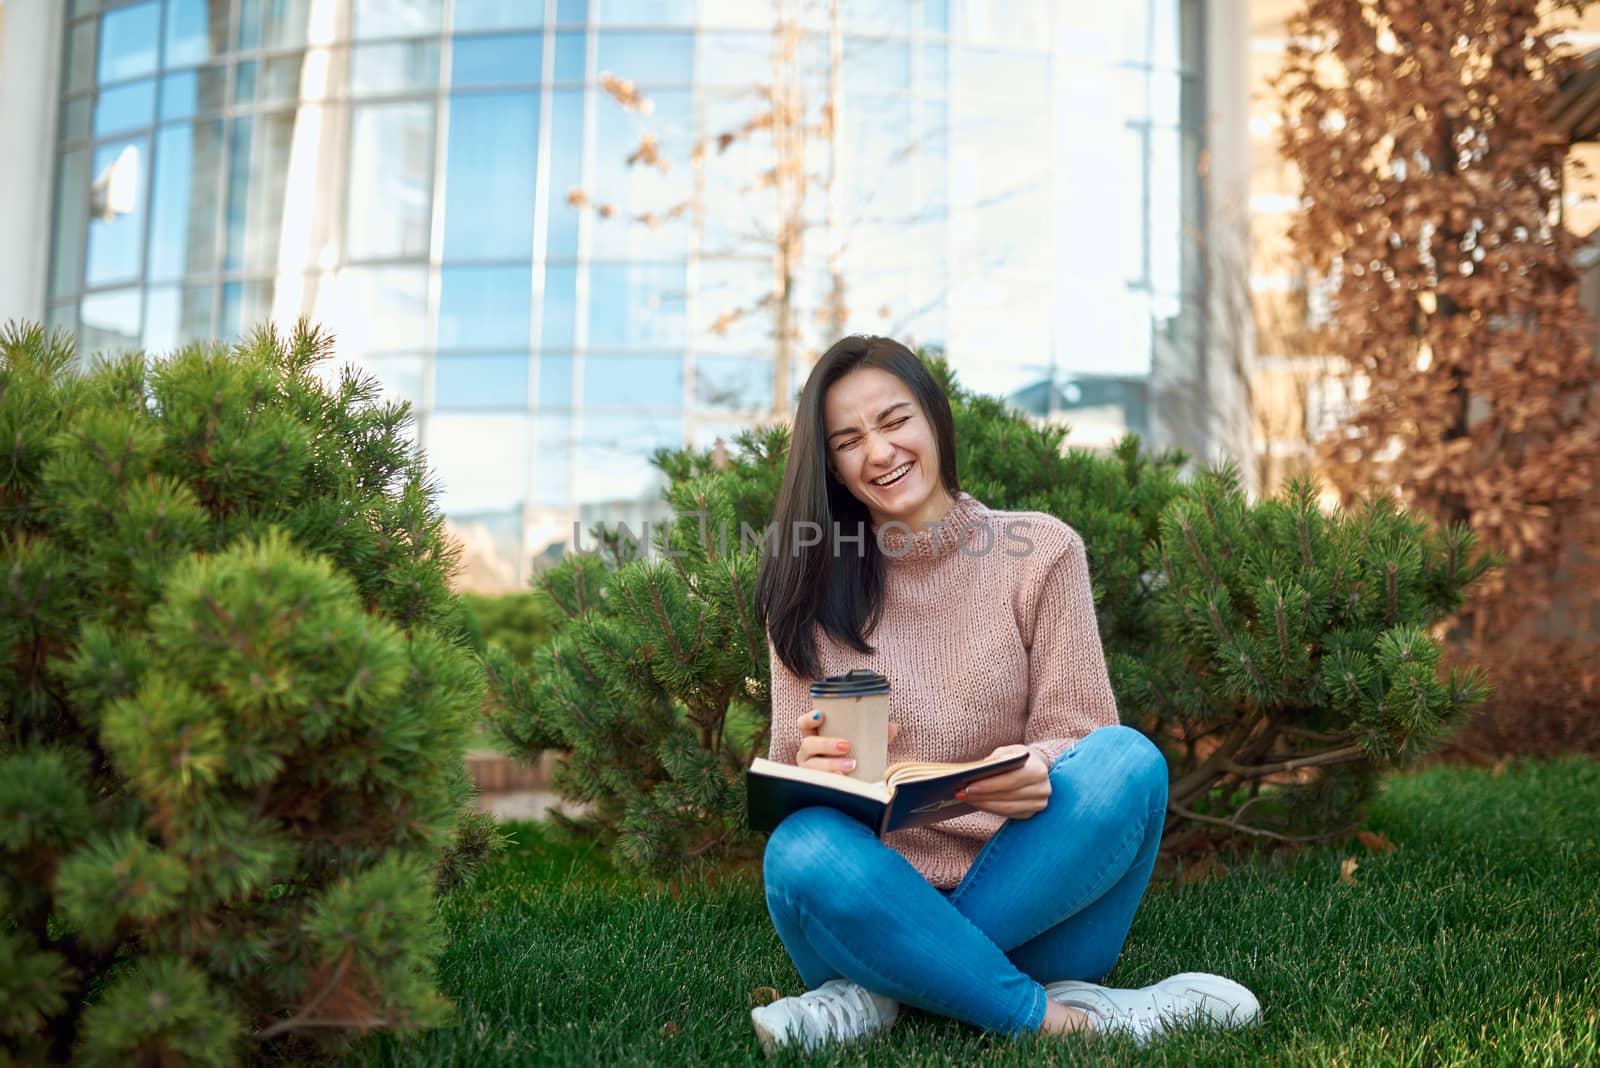 Nice-looking female student laughing enjoying funny book on a cosy green lawn nearby a tall city tower